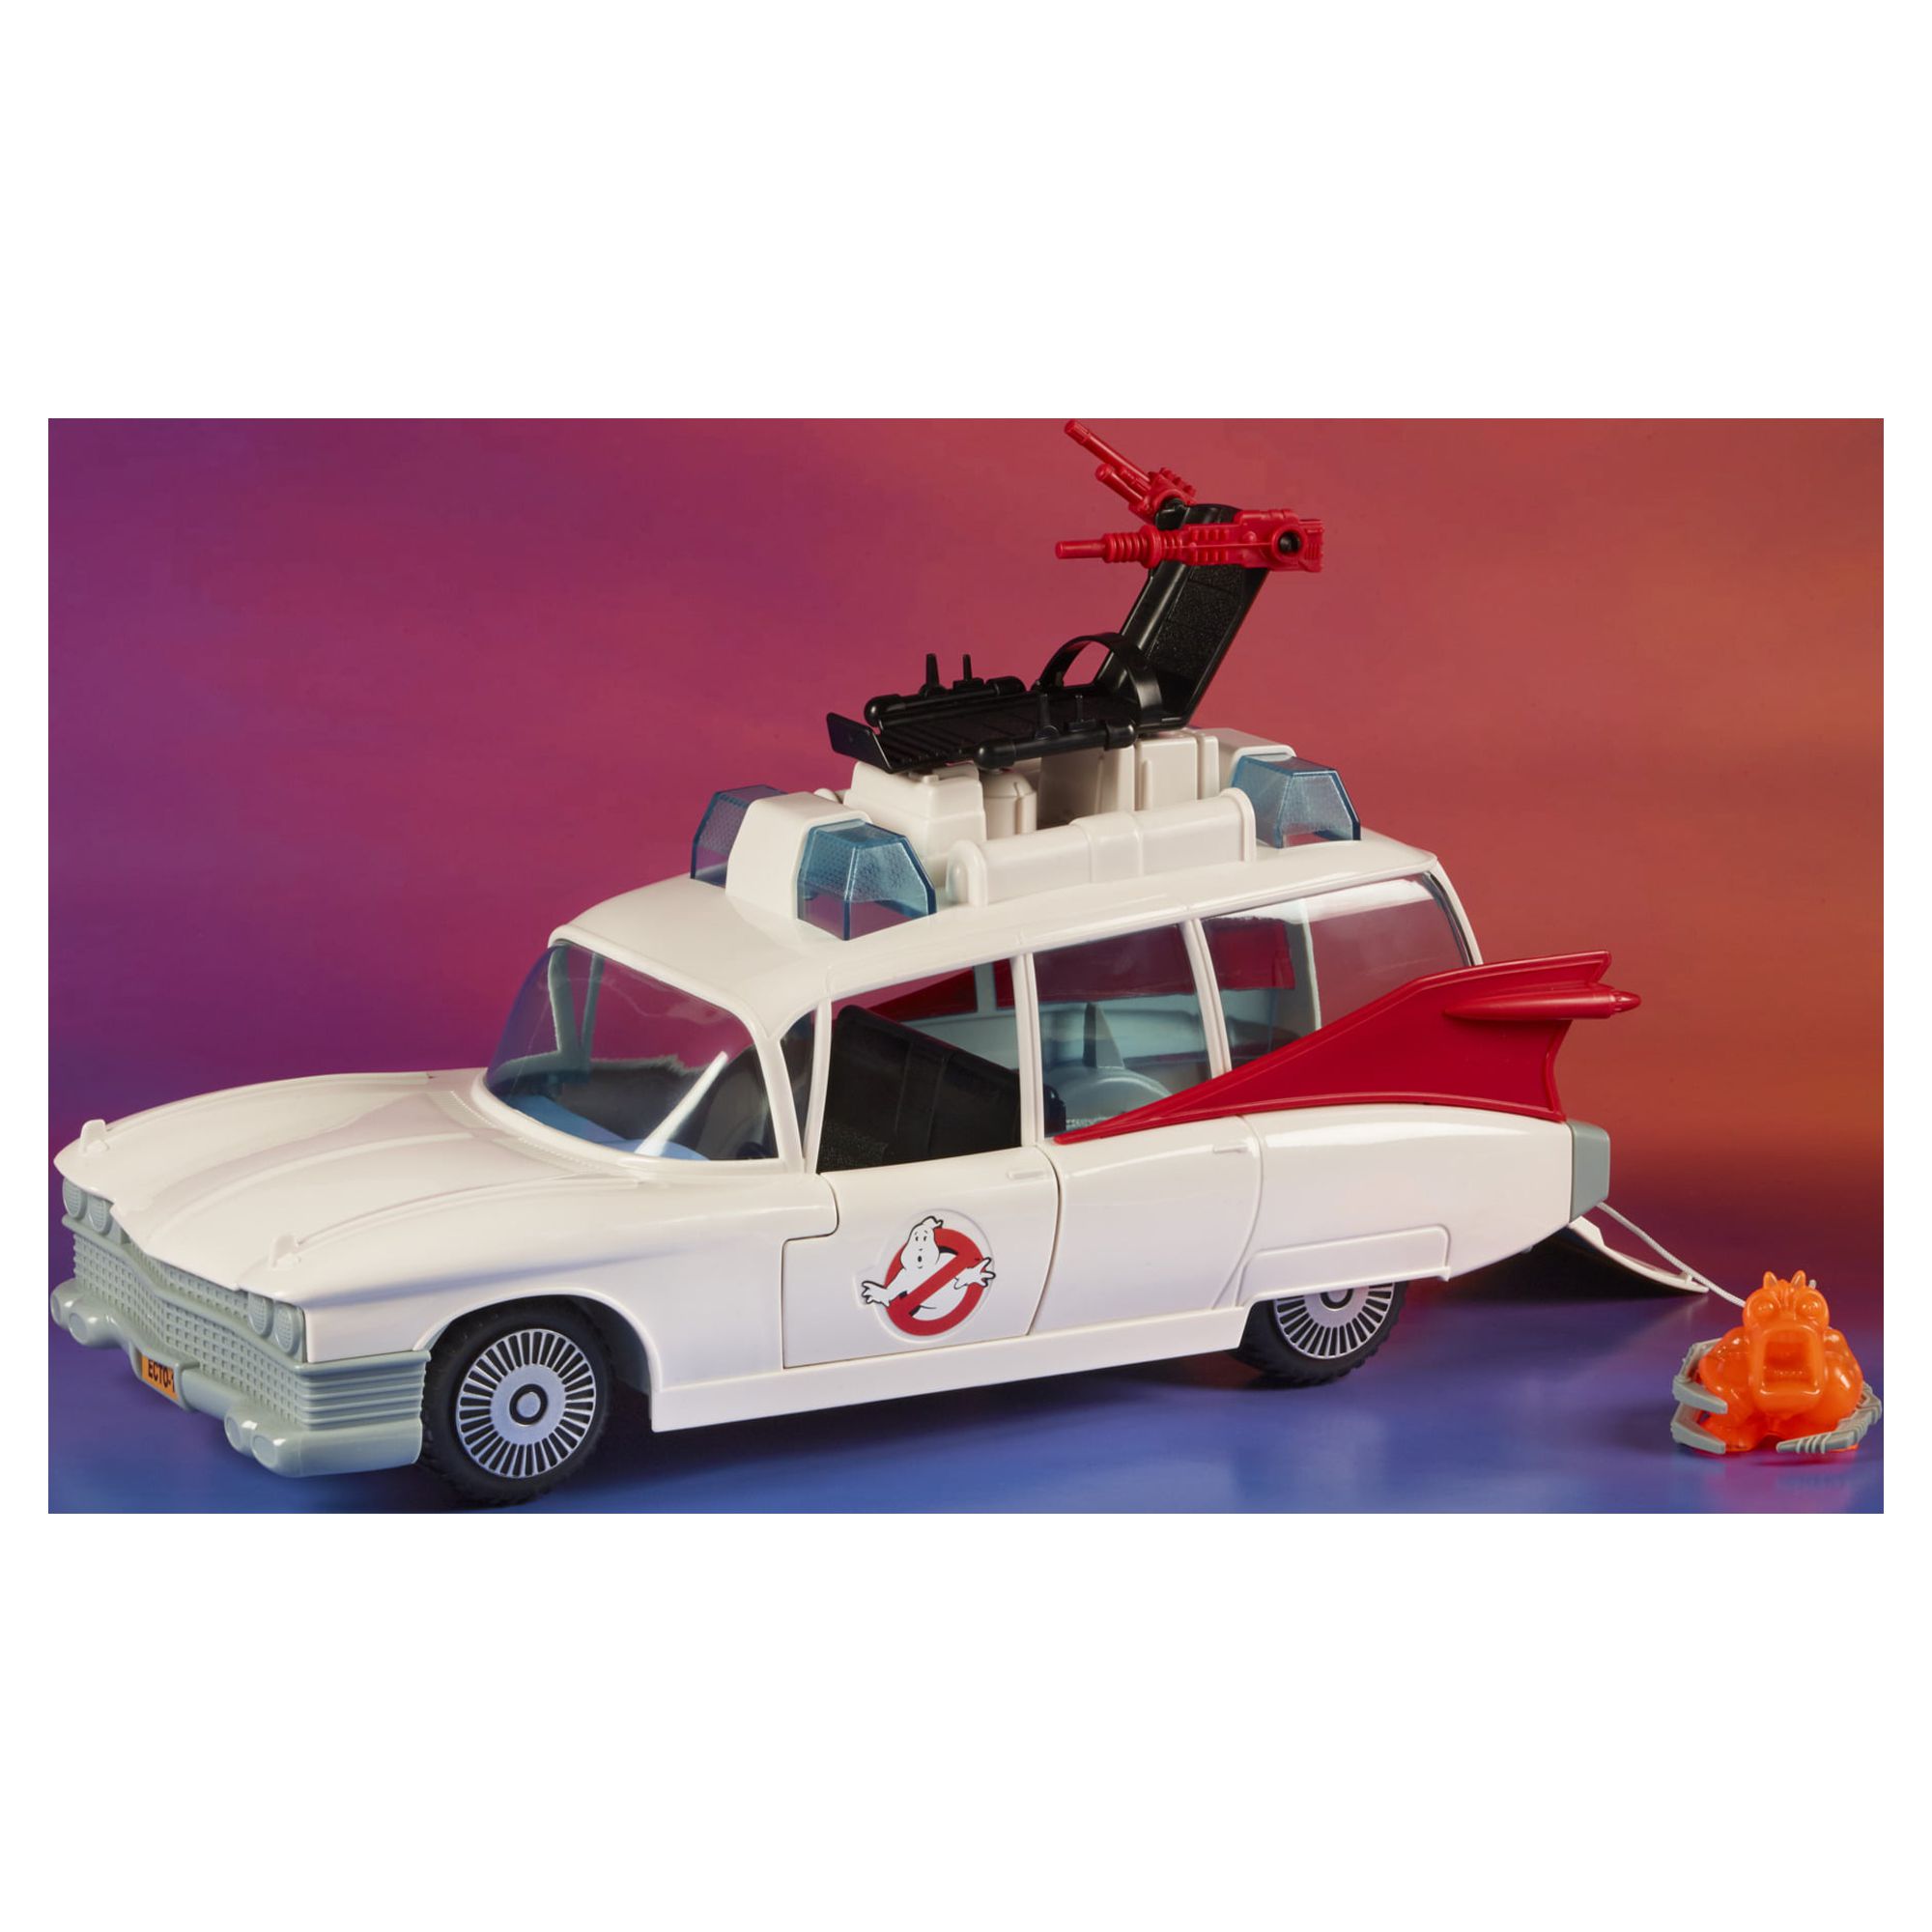 Ghostbusters Kenner Classics the Real Ghostbusters Ecto-1 Retro Vehicle - image 4 of 6